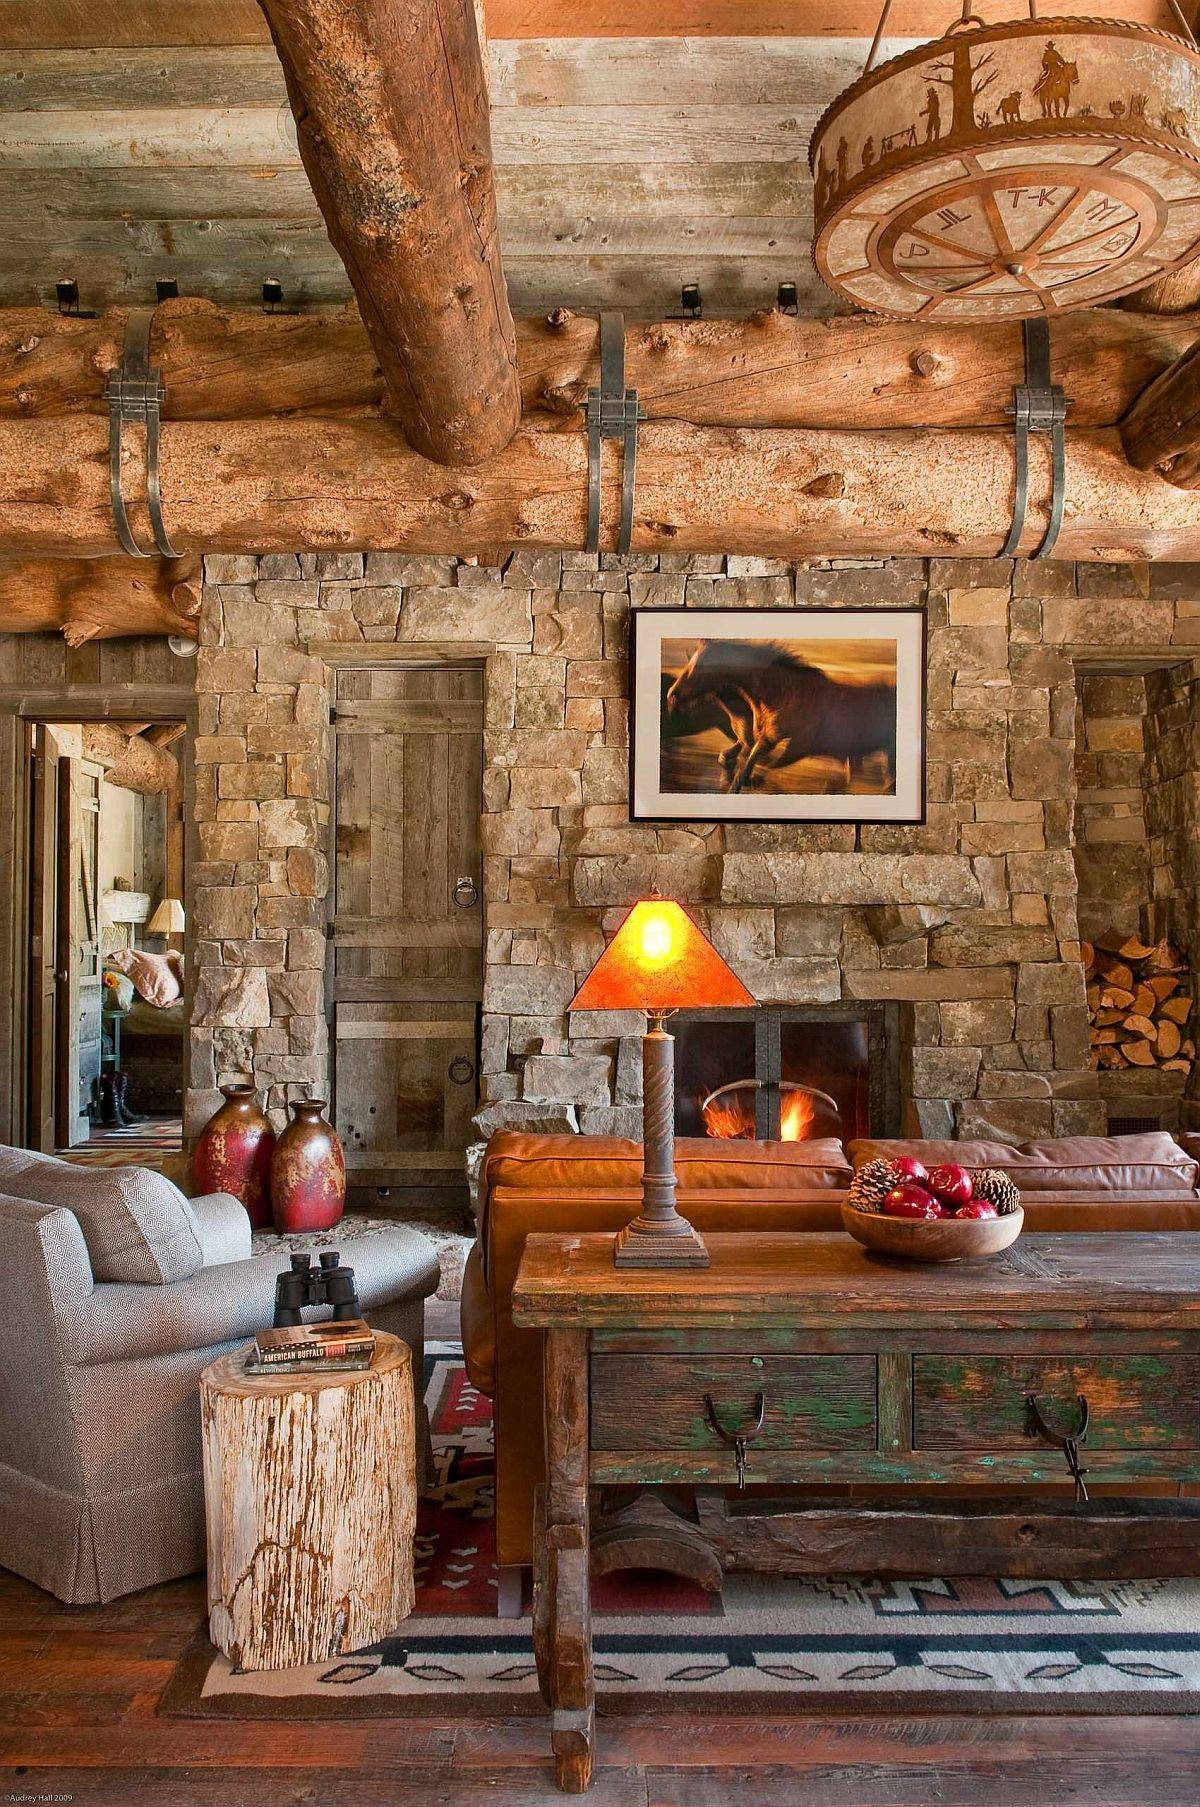 vintage-furniture-pieces-and-reclaimed-wood-decor-make-a-difference-in-the-rustic-living-space-36108.jpg